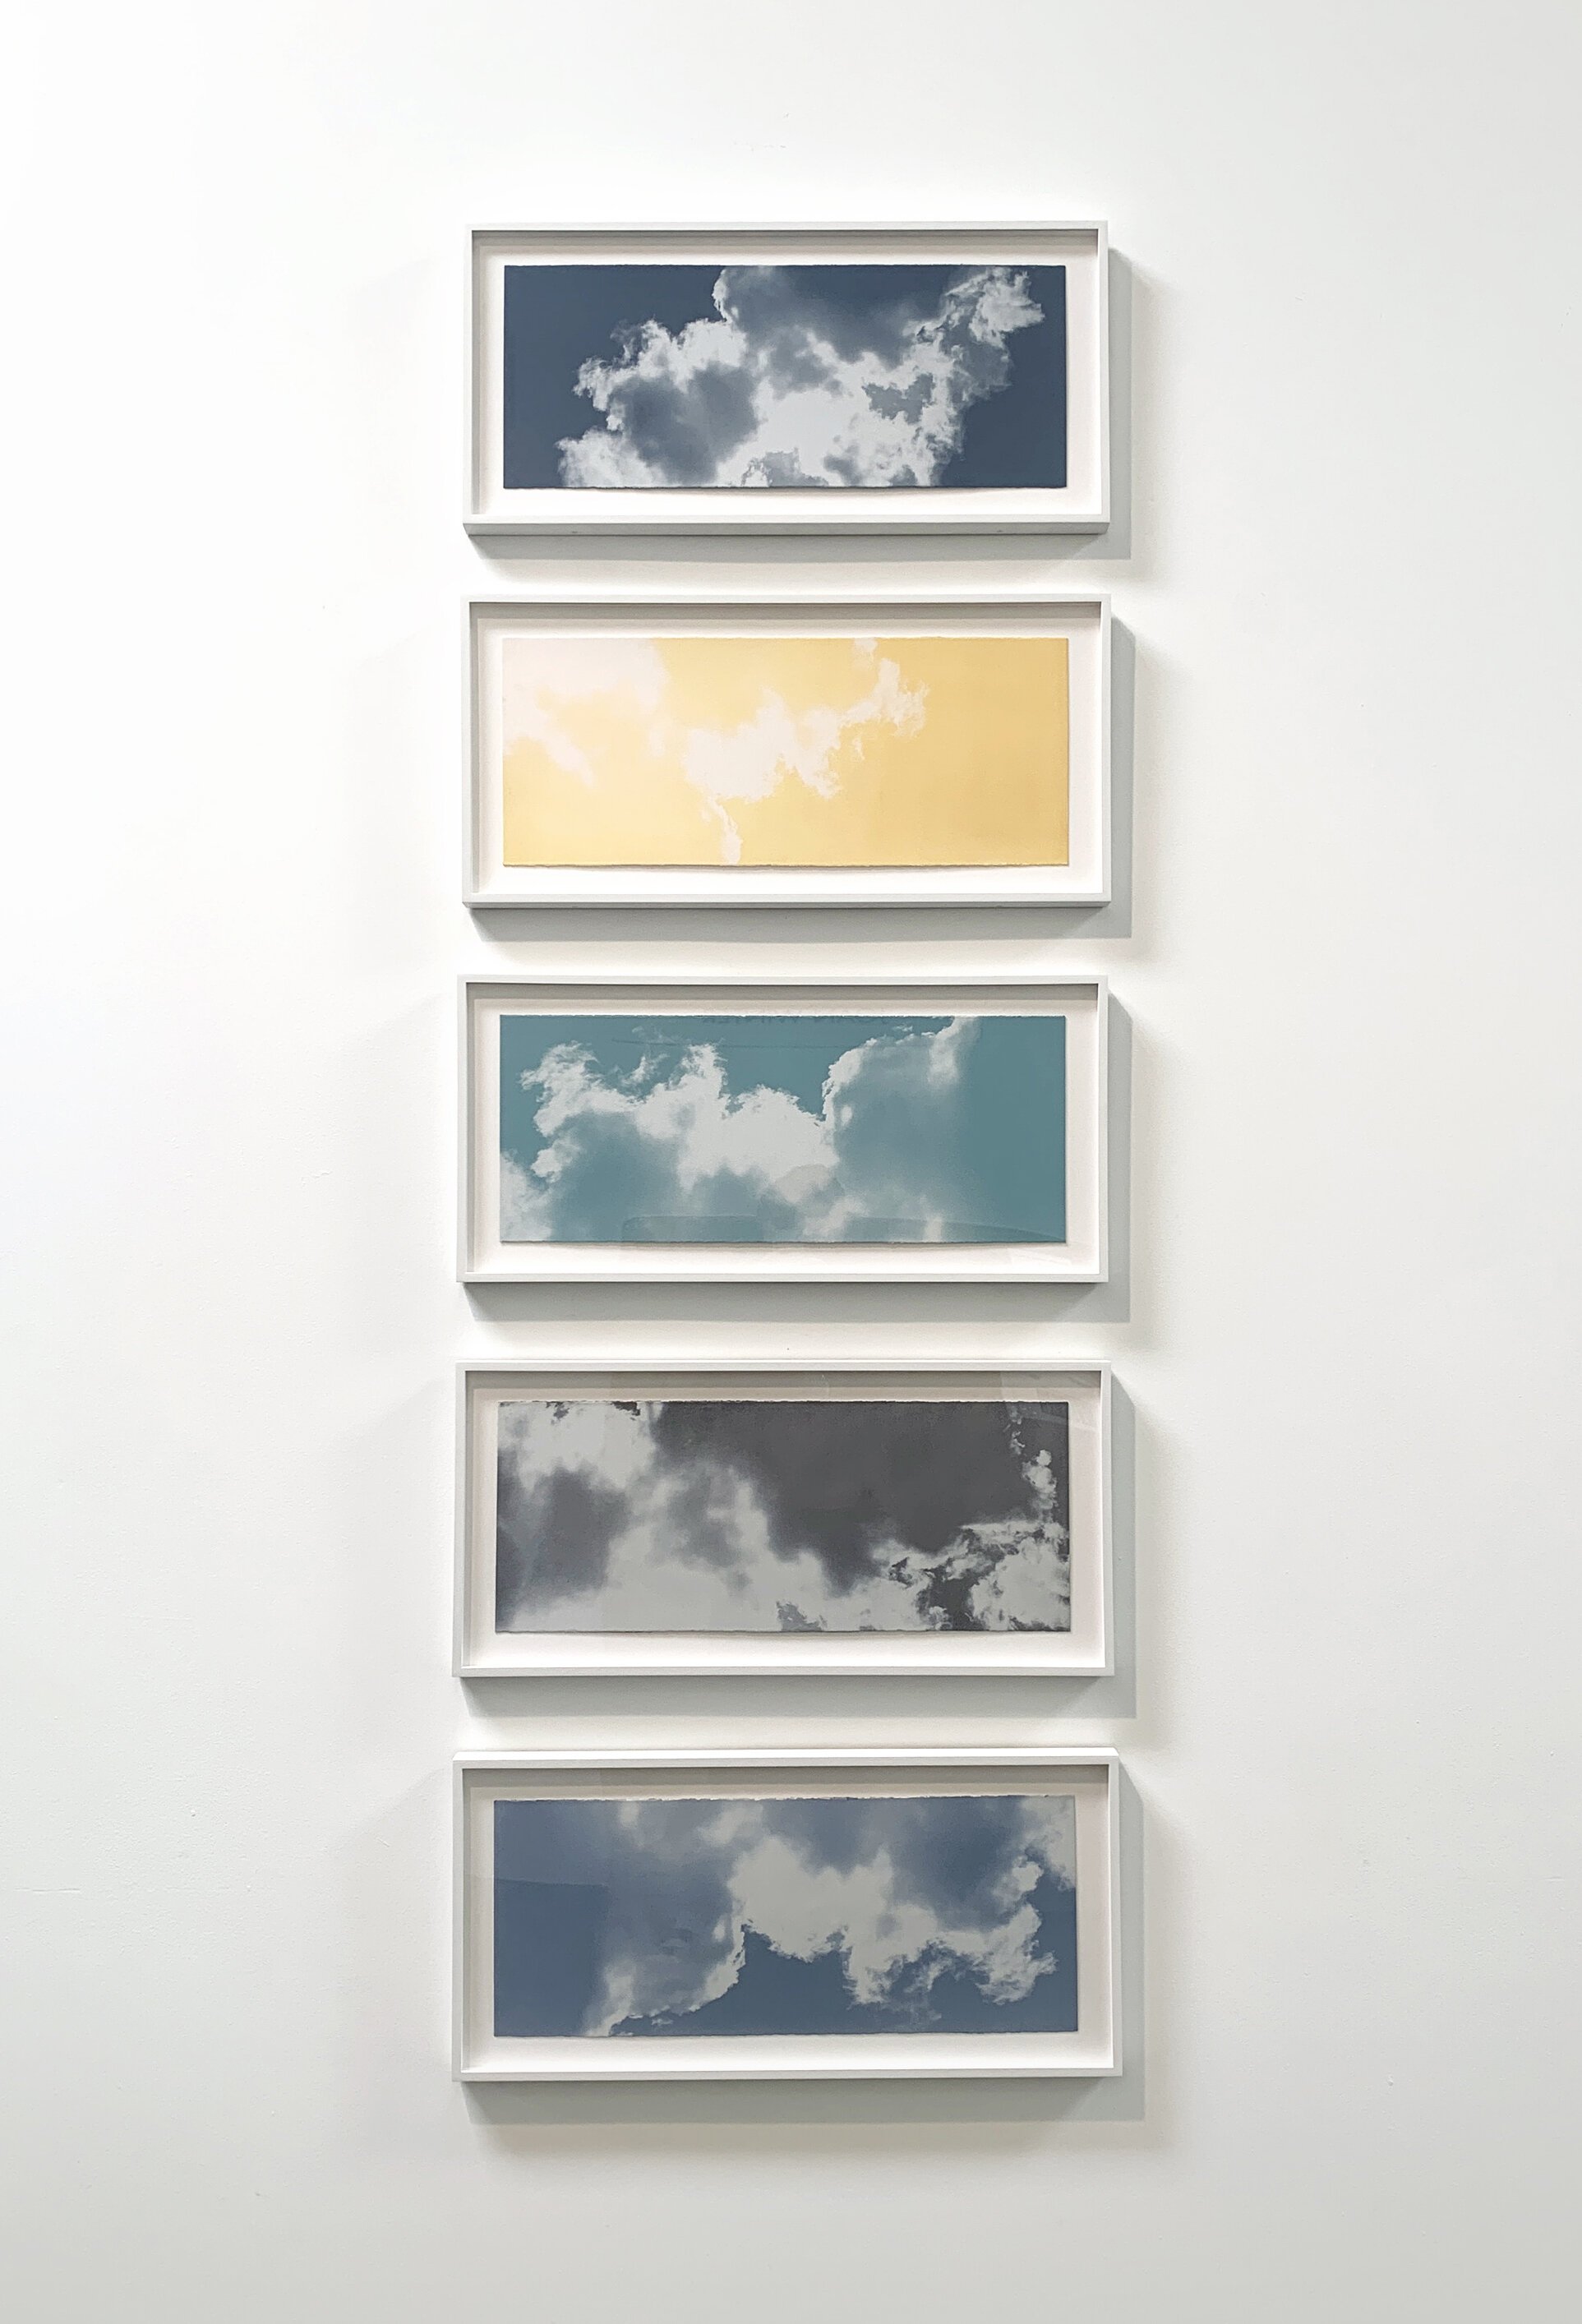  Fleeting Series, 2020, Fleeting (Phthalo Blue), Fleeting (Naples Yellow), Fleeting (Cobalt Teal), Fleeting (Silver Grey), Fleeting (Ultramarine Blue), Archival pigment print on oil painted Fabriano paper, Monoprint, 9 x 22 inches 